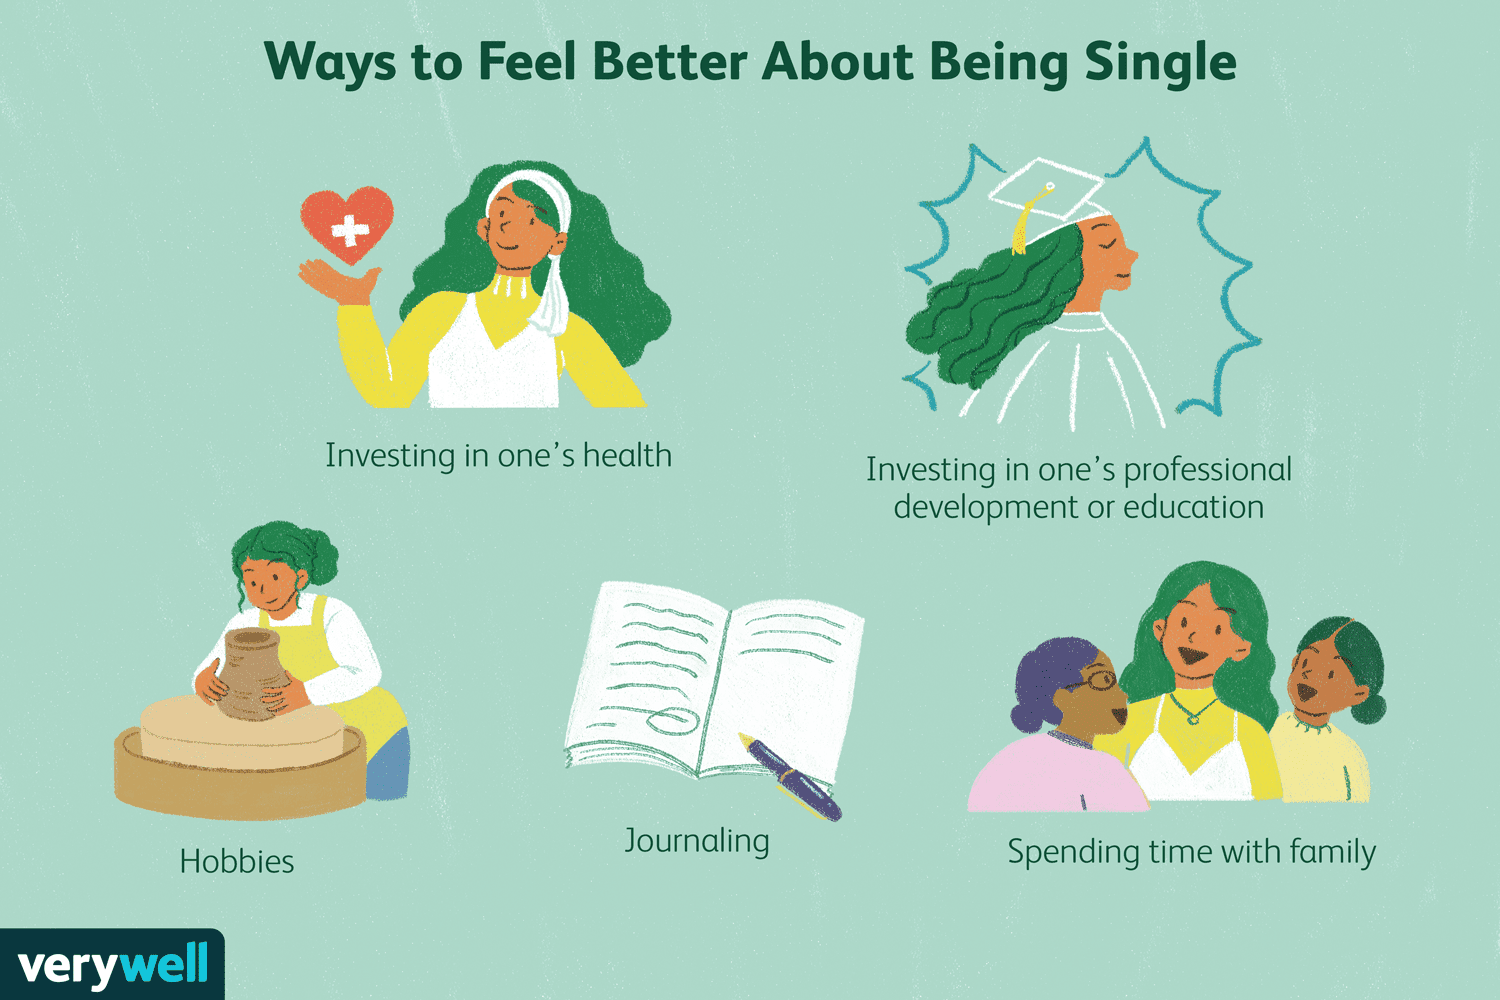 6 Ways to Feel Better About Being Single